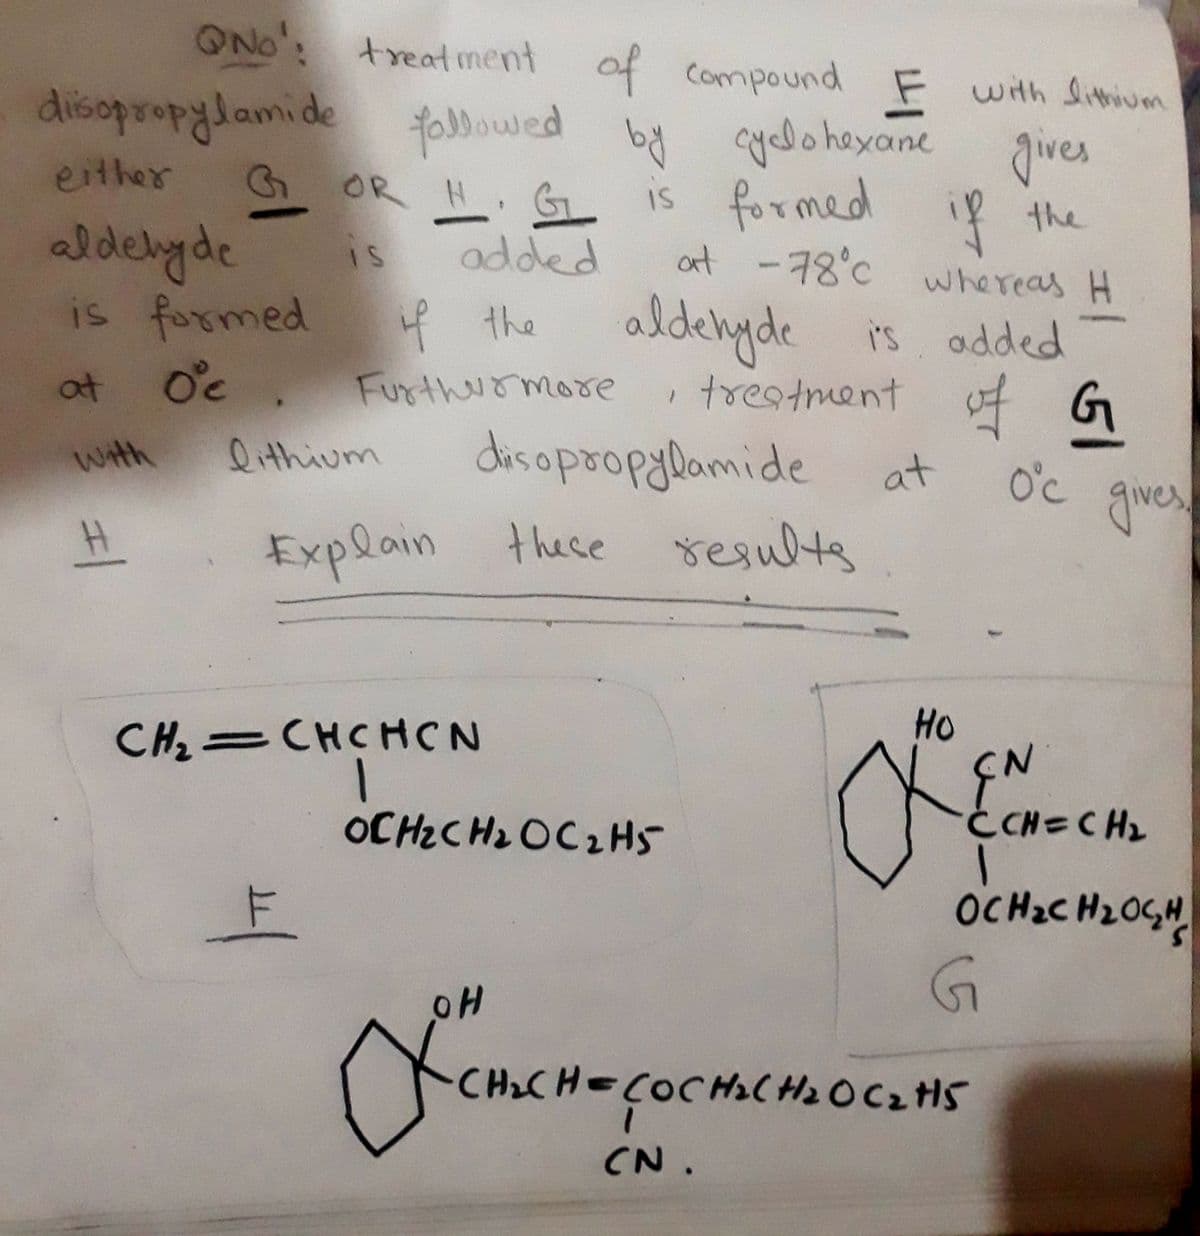 QNo: treatment of compound F with lithium
diisopropylamide followed by cyclohexane gives
either
aldehyde
G OR H. G
is formed if the
at -78°C whereas H
IS
added
is formed
if the
at
Oc. Furthermore
1
aldehyde is added
treatment of G
역어
With
lithium
disopropylamide
at
O°c gives.
#1
Explain these results
CH2=CHCHCN
OCH2CH2O C2H5
F
OH
HO
EN
ĊCH=CH₂
OCH₂CH₂OCH
G
CH₂CH=COCH2CH2O C2H5
CN.